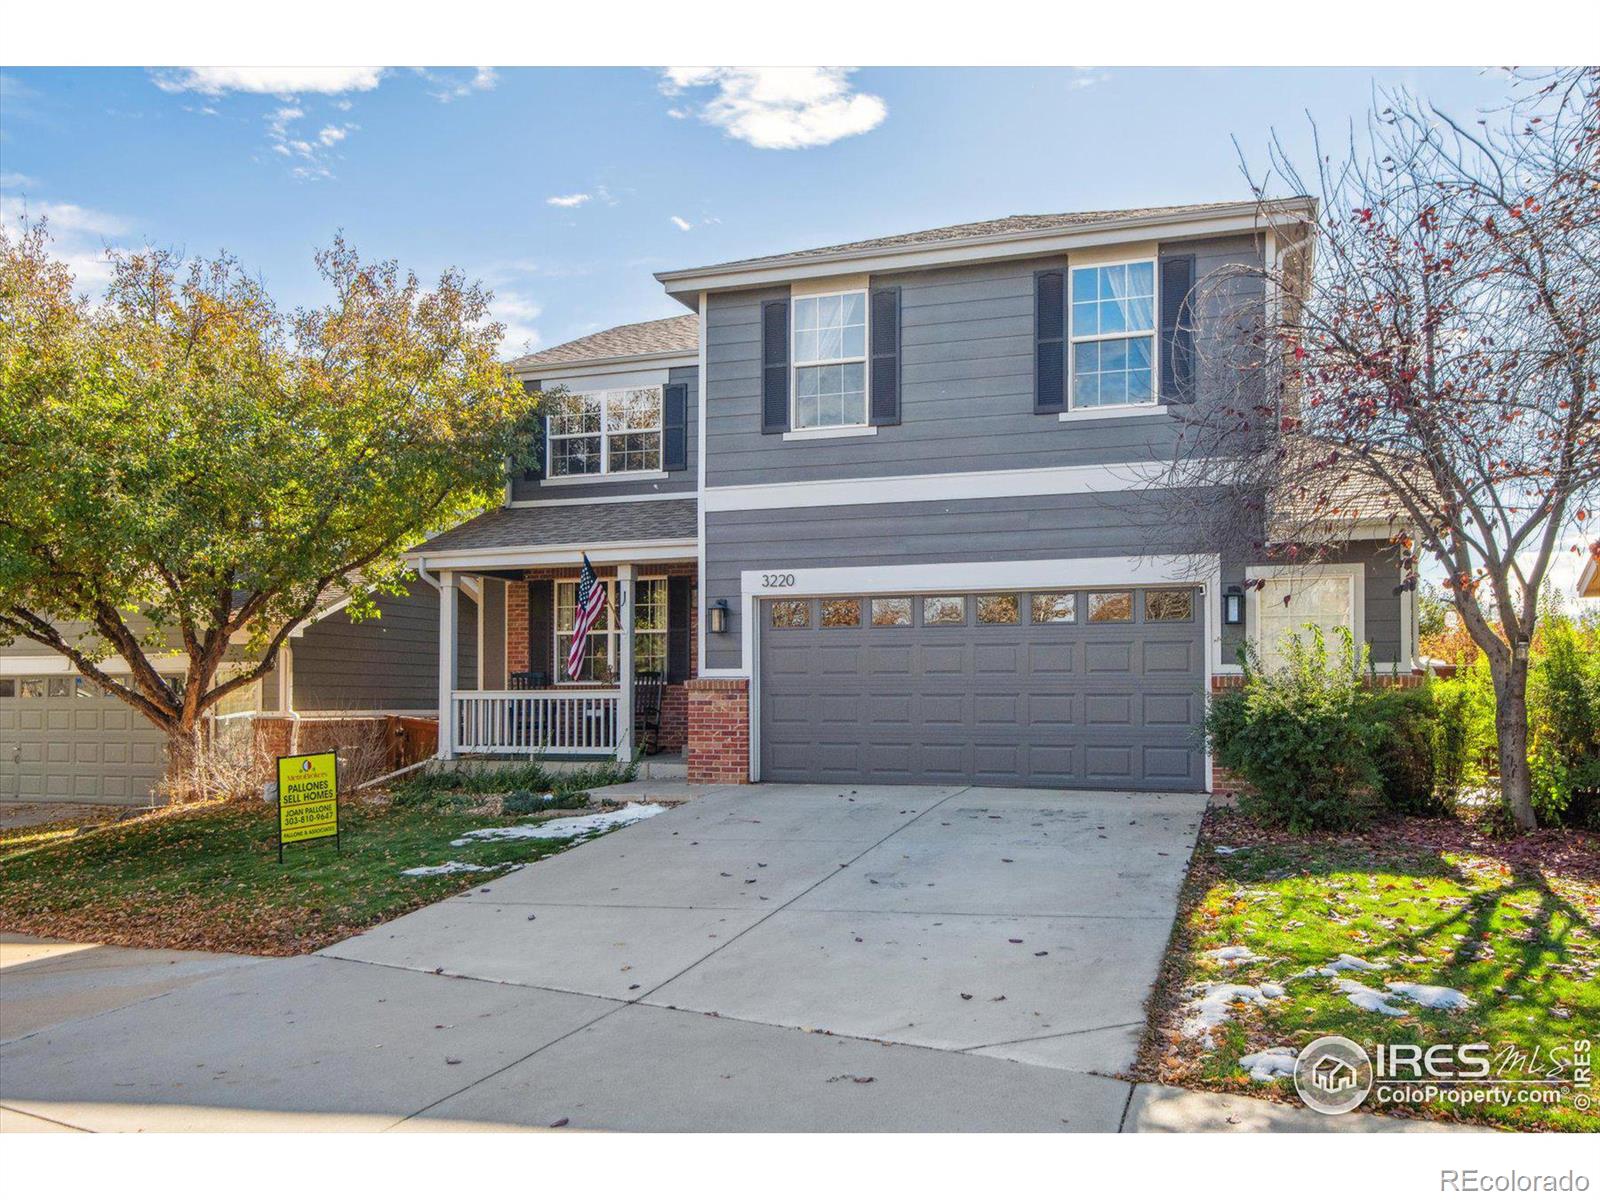 3220  Shannon Drive, broomfield MLS: 456789999209 Beds: 4 Baths: 4 Price: $750,000